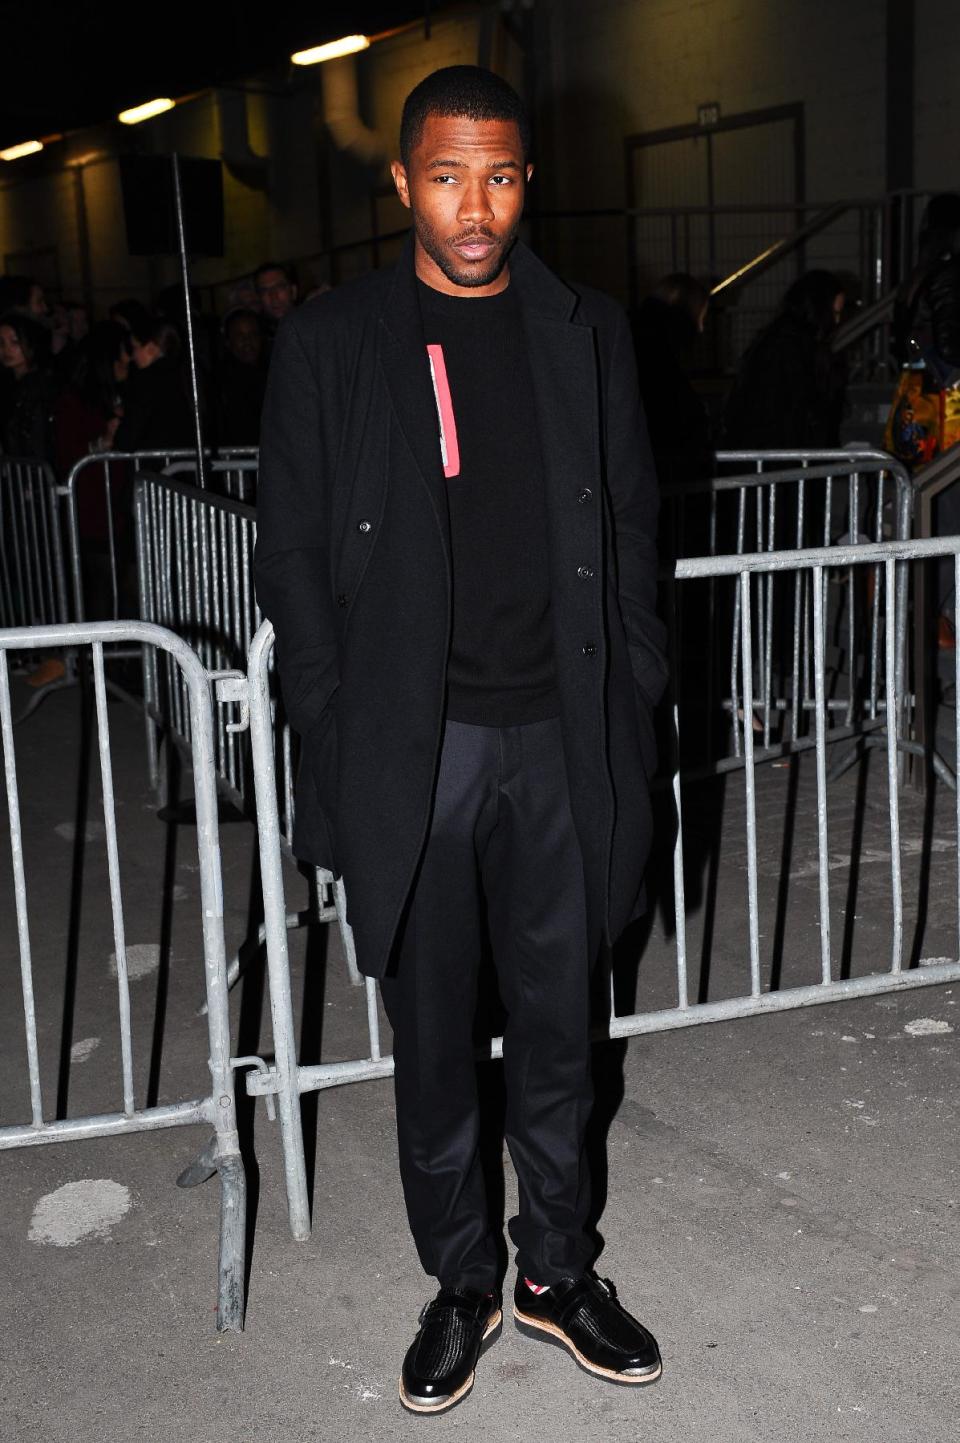 Singer Frank Ocean arrives at Givenchy's Ready to Wear's Fall-Winter 2013-2014 fashion collection presented Sunday, March 3, 2013 in Paris. (AP Photo/Zacharie Scheurer)